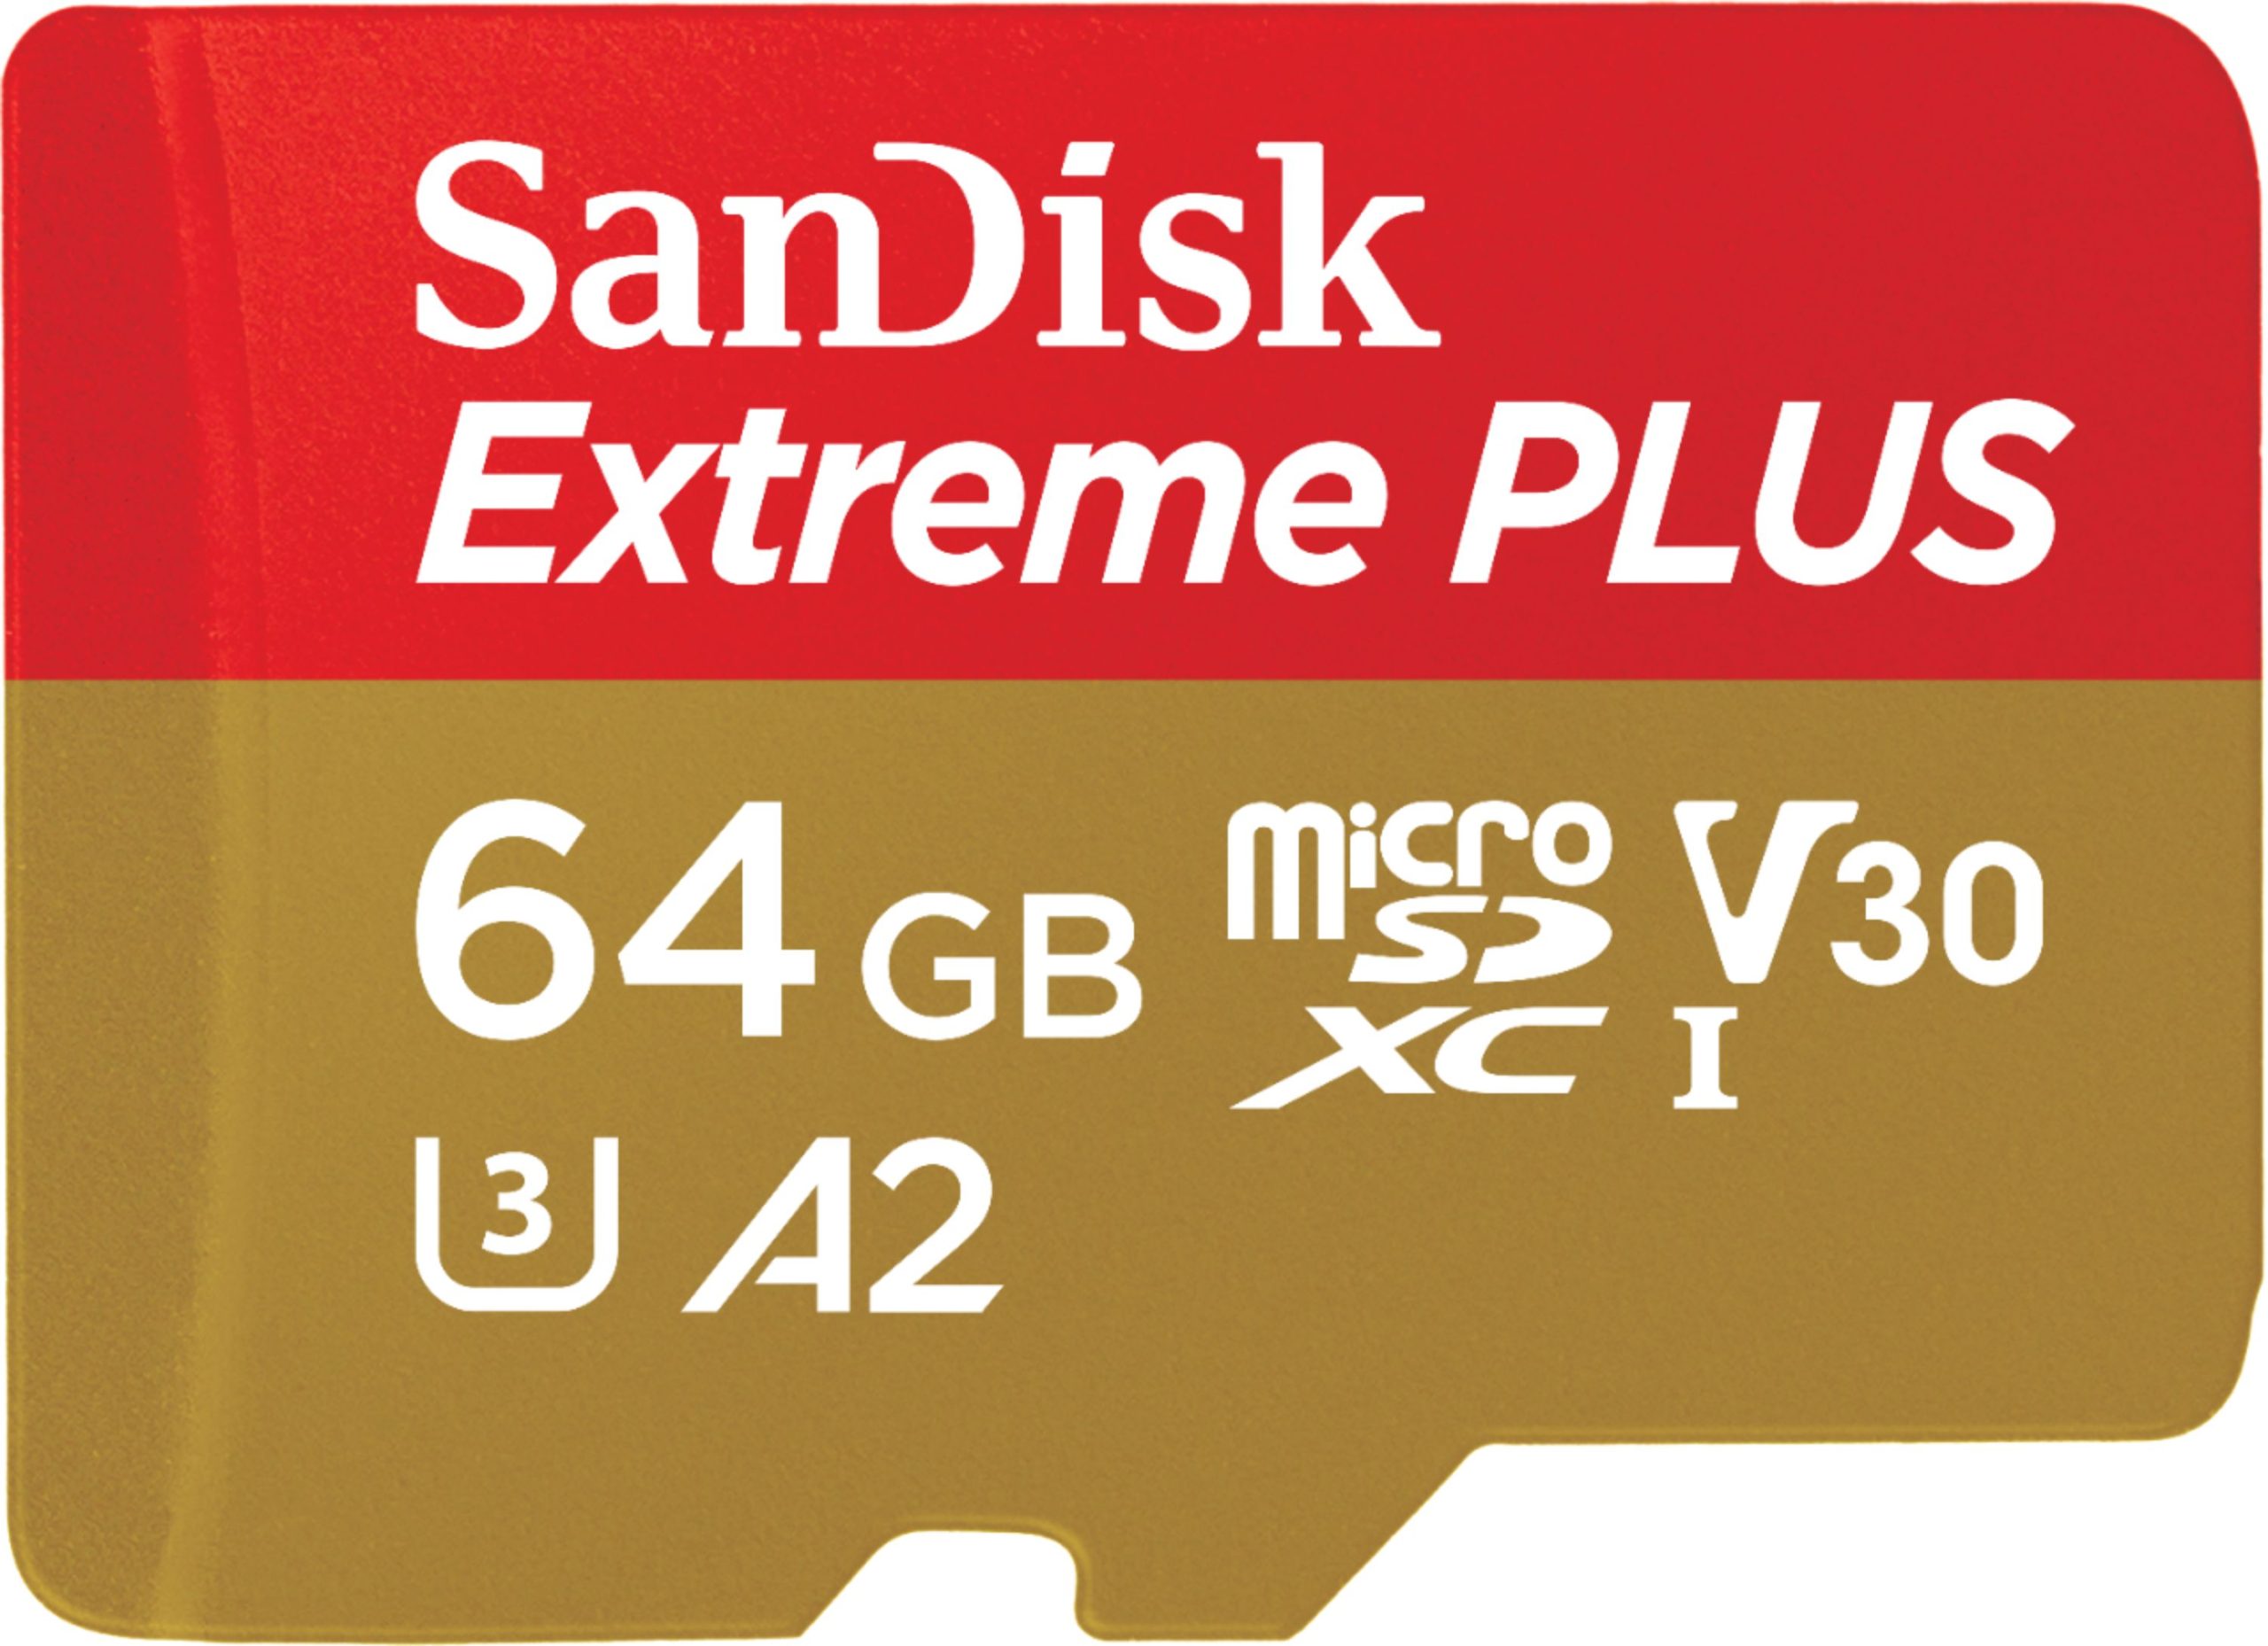 SanDisk – Extreme PLUS 64GB microSDXC UHS-I Memory Card – Just $18.99 at Best Buy